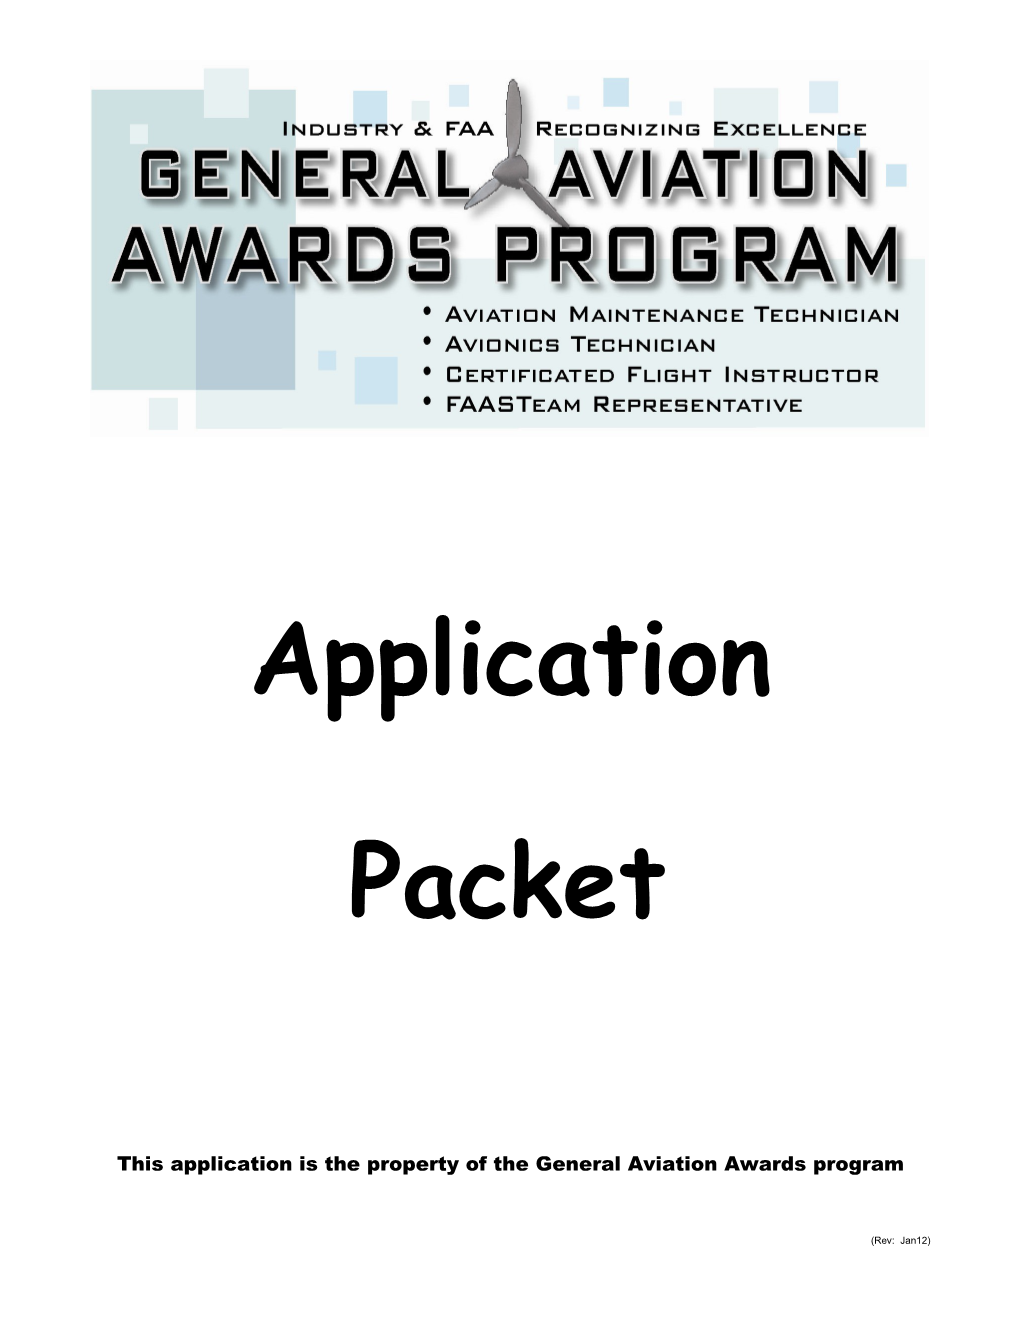 This Application Is the Property of the General Aviation Awards Program